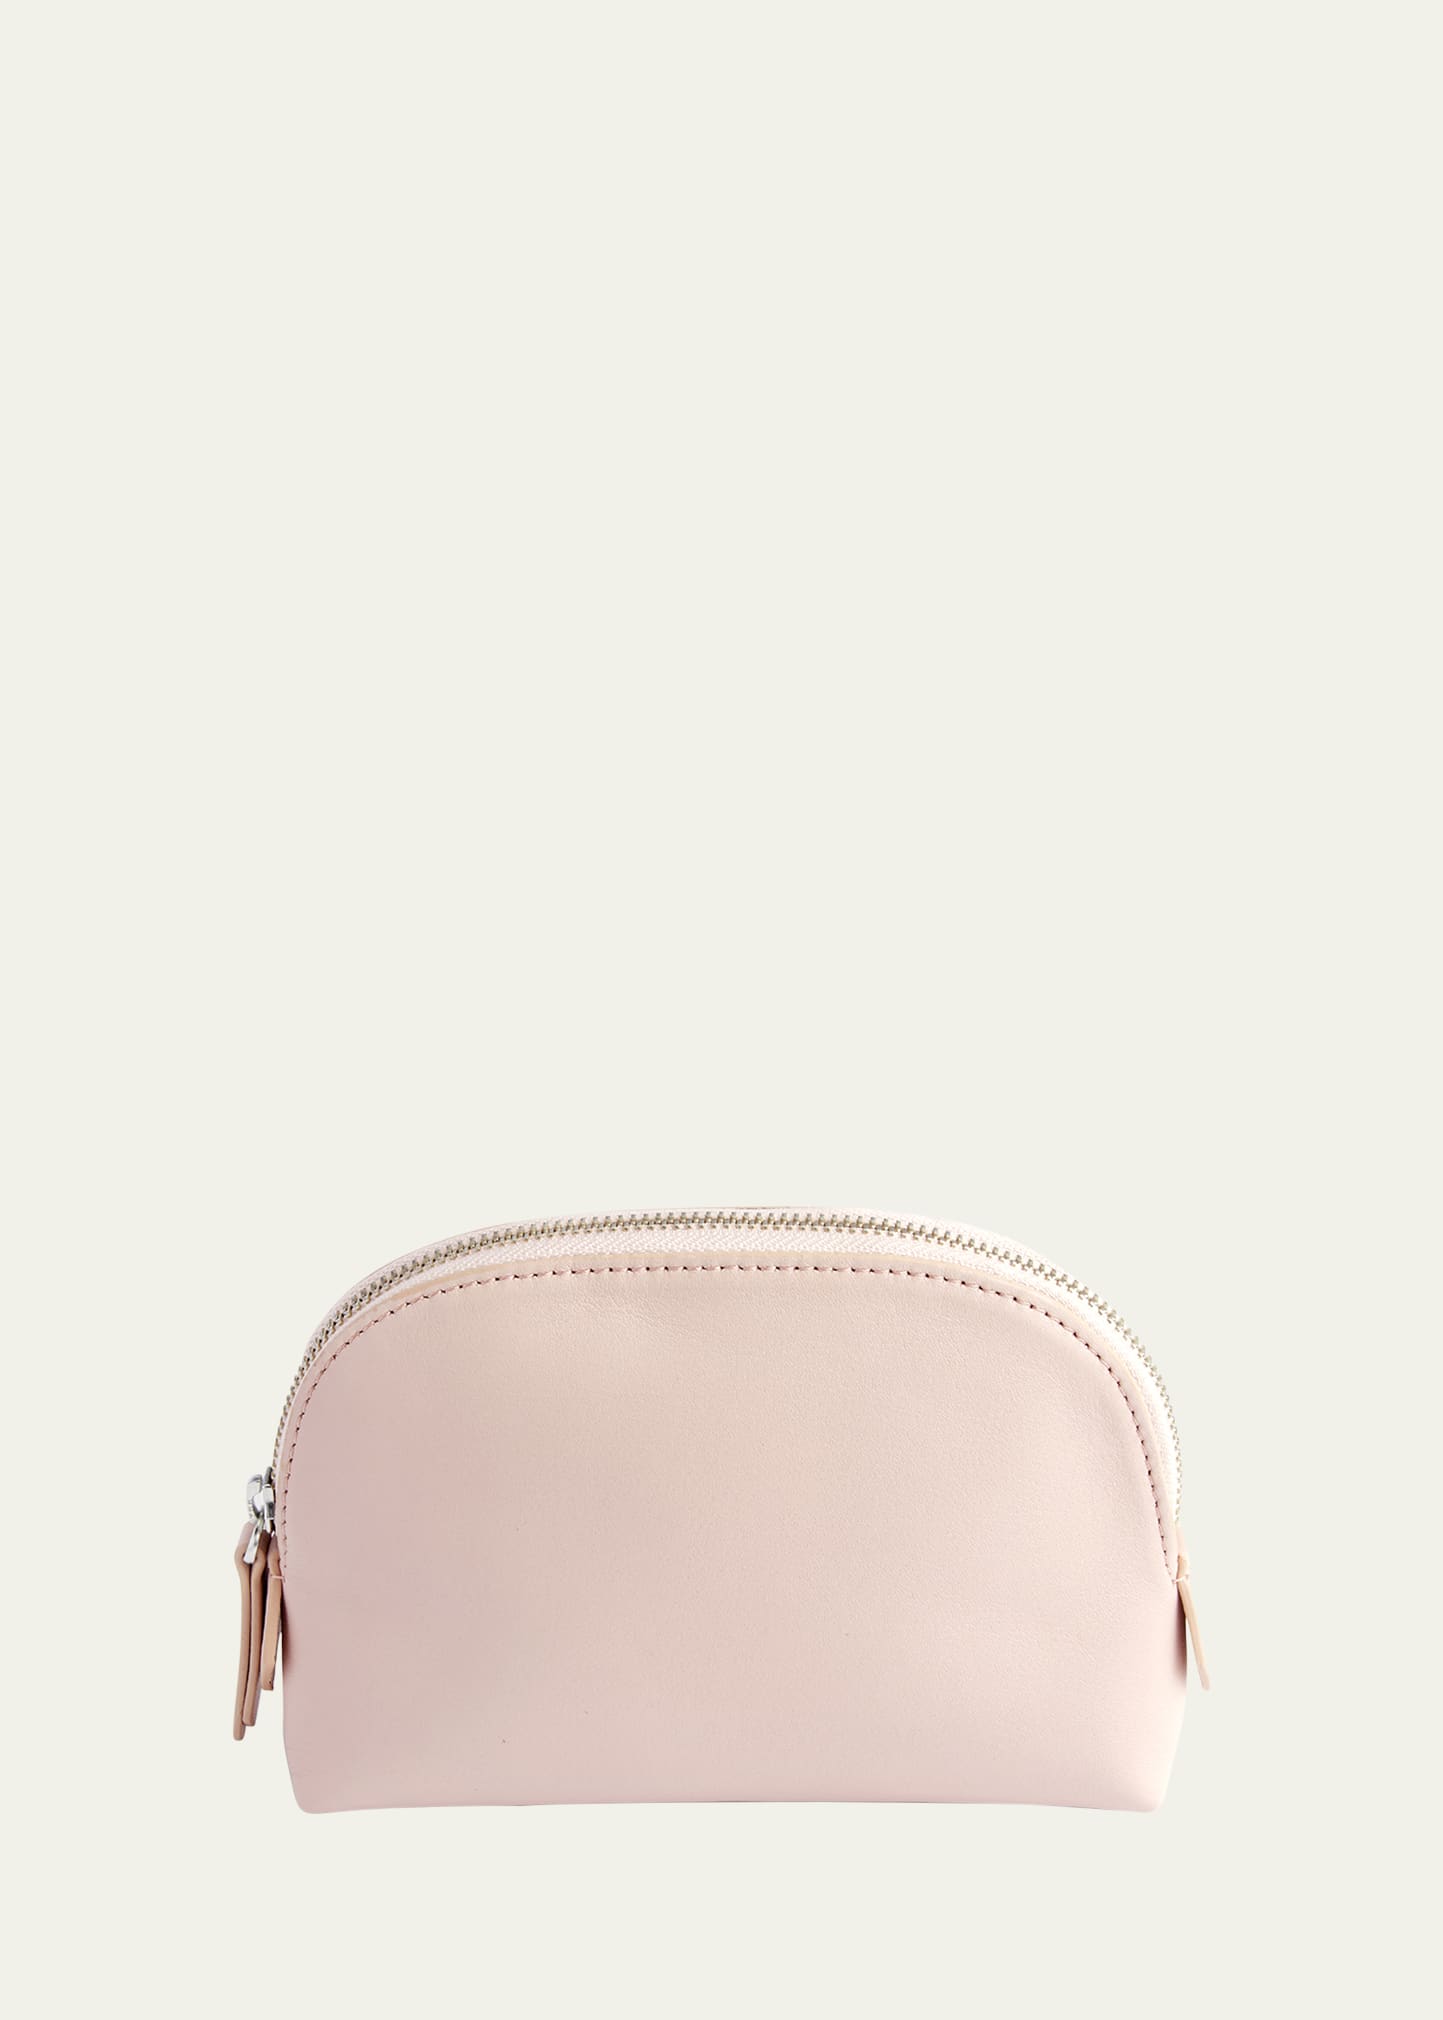 Royce New York Compact Cosmetic Bag In Blush Pink